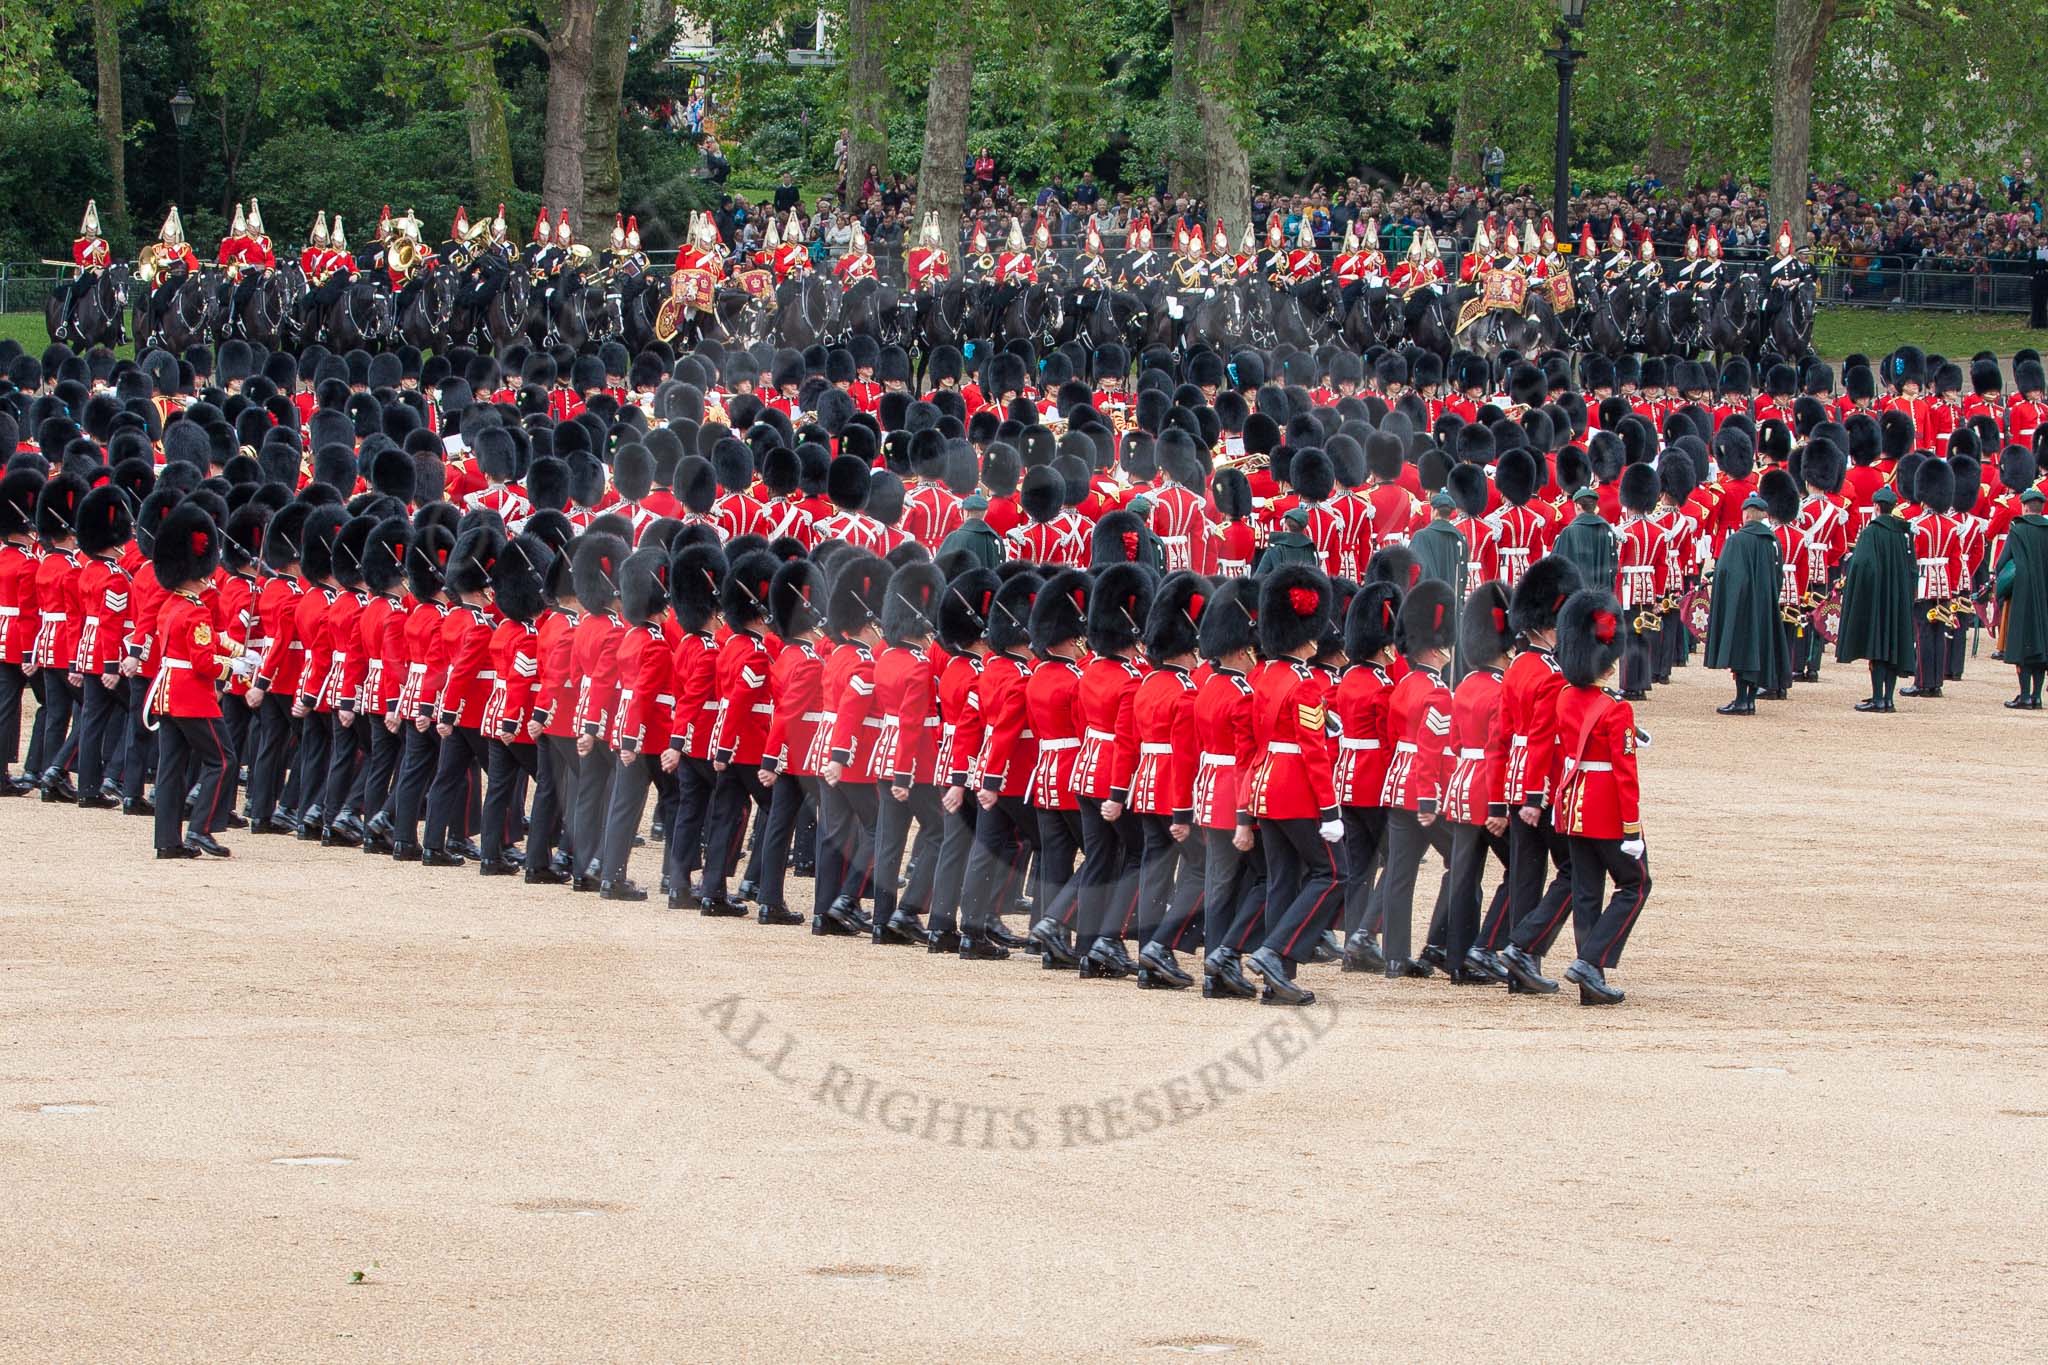 The Colonel's Review 2012: No. 1 Guard (Escort for the Colour), 1st Battalion Coldstream Guards, getting ready for the Collection of the Colour..
Horse Guards Parade, Westminster,
London SW1,

United Kingdom,
on 09 June 2012 at 11:15, image #258